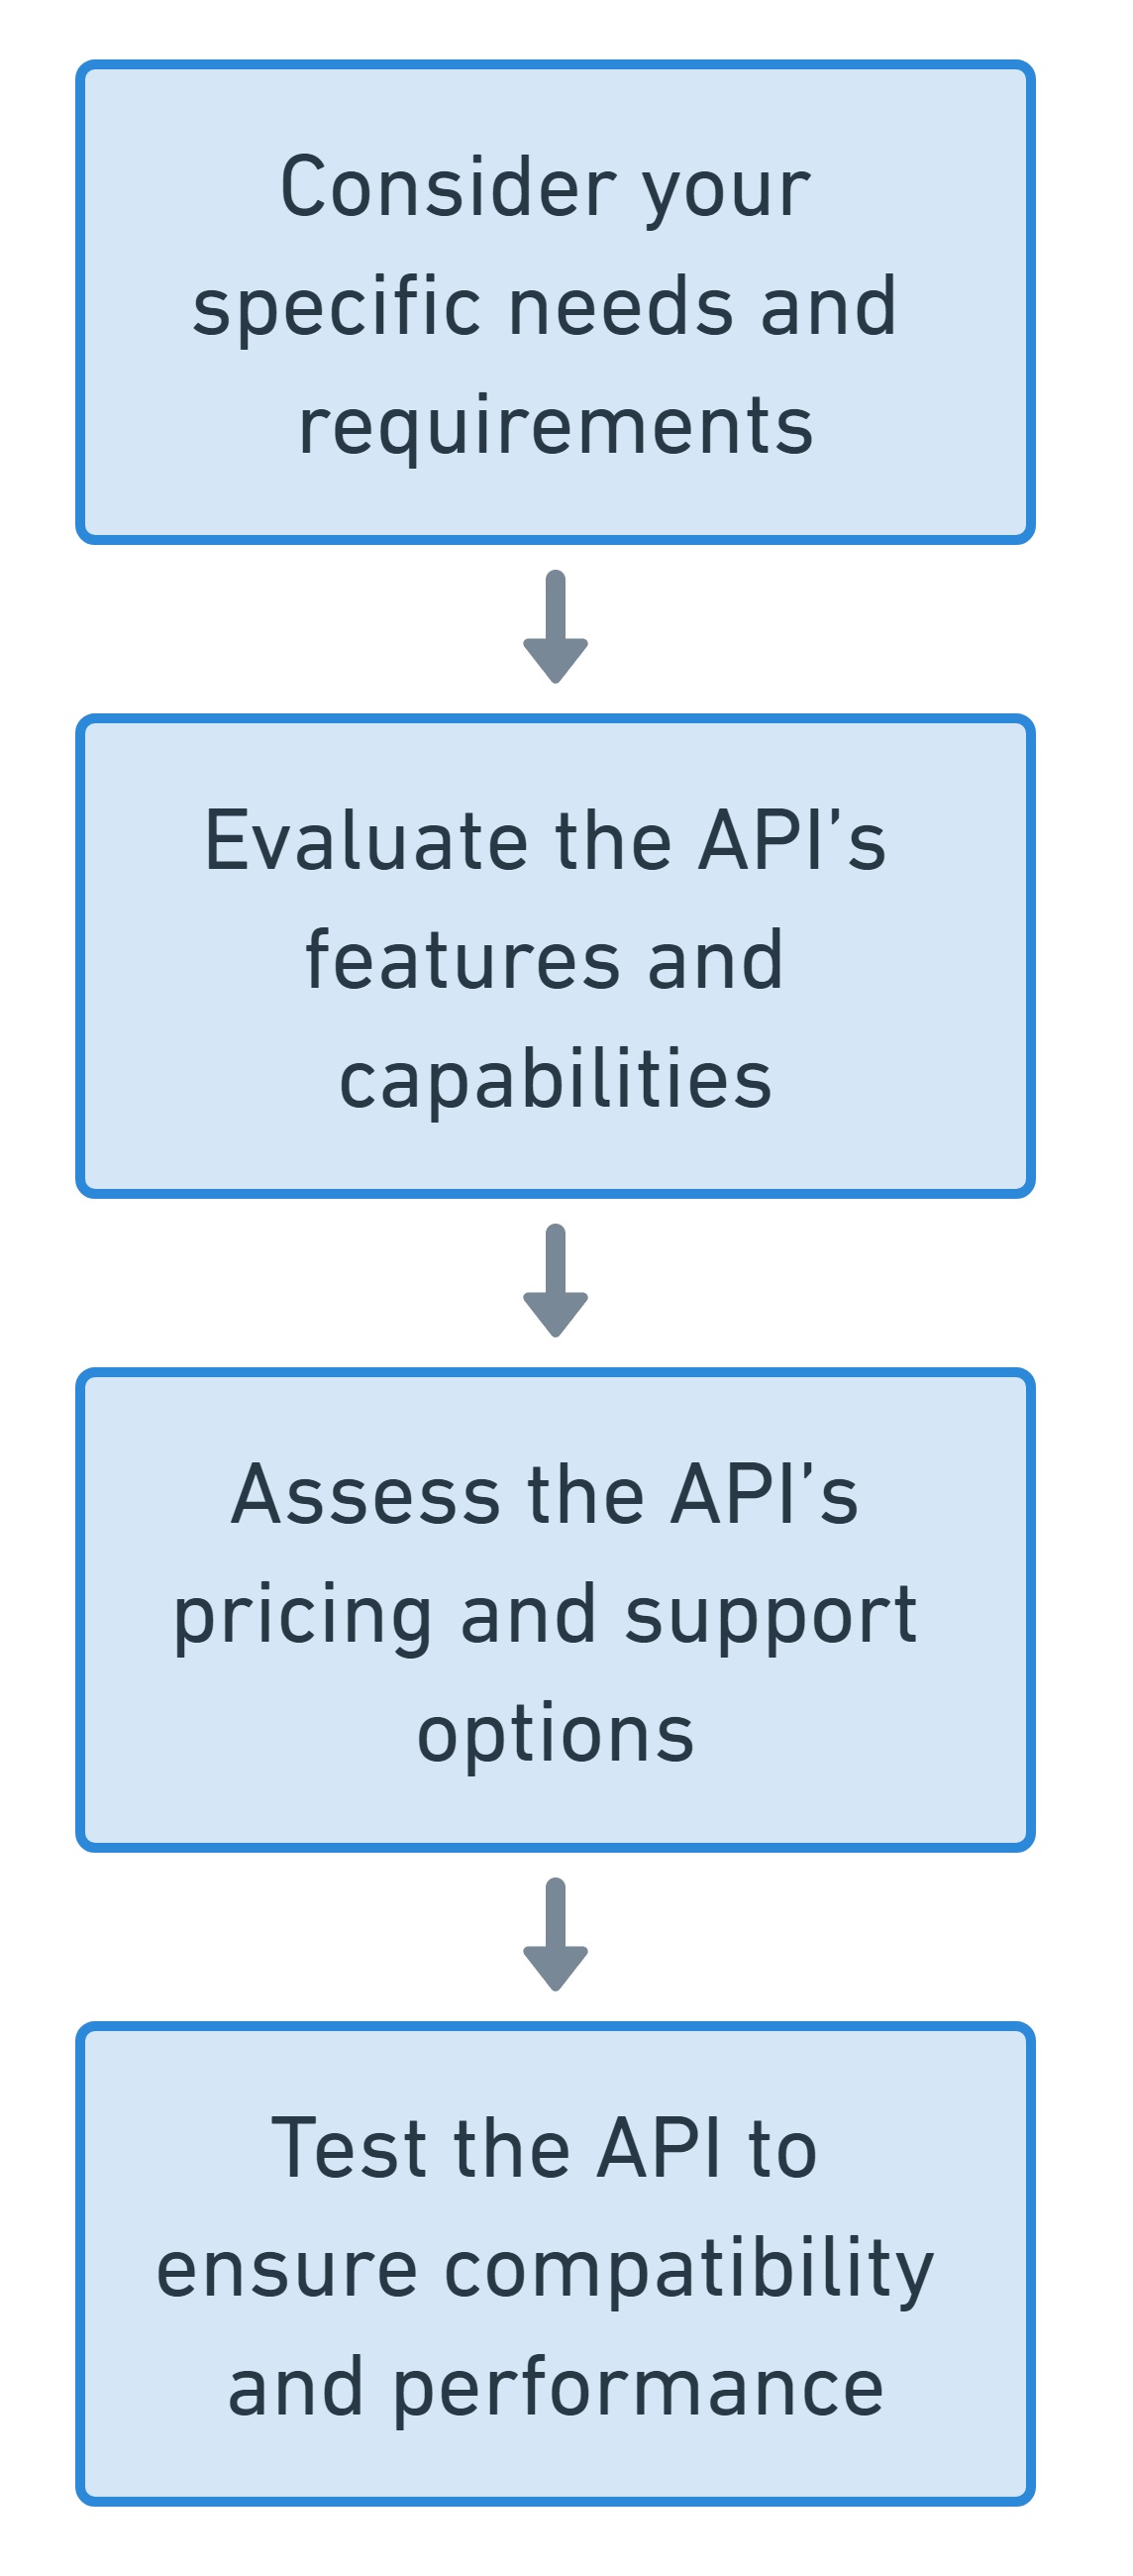 To choose the best SEO API, you should consider your specific needs and requirements, evaluate the API's features and capabilities, assess the API's pricing and support options, and test the API to ensure compatibility and performance.